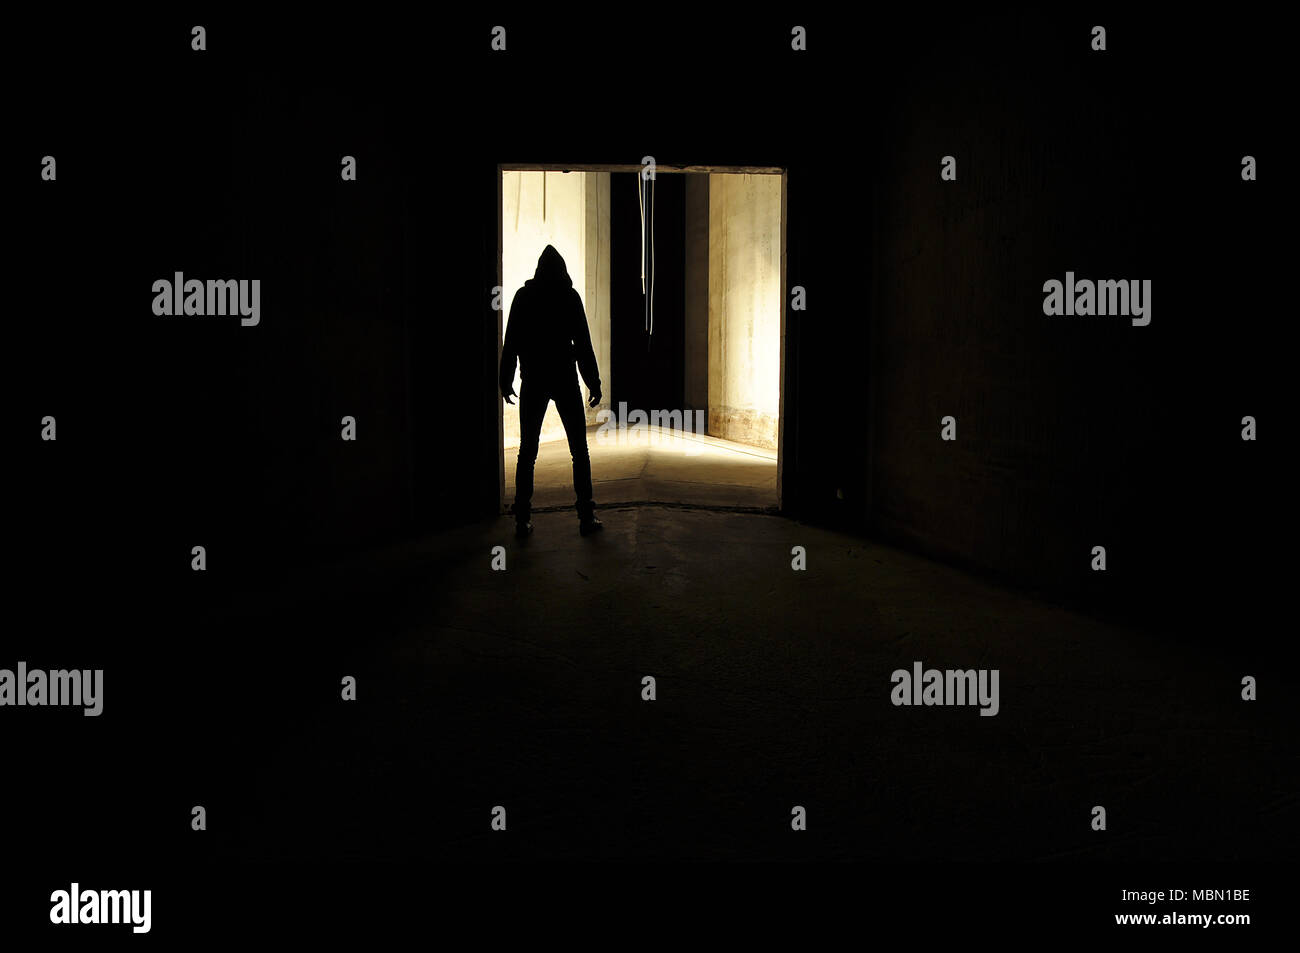 unrecognizable silhouette of person with a hood standing in a door way of an empty concrete room. Stock Photo